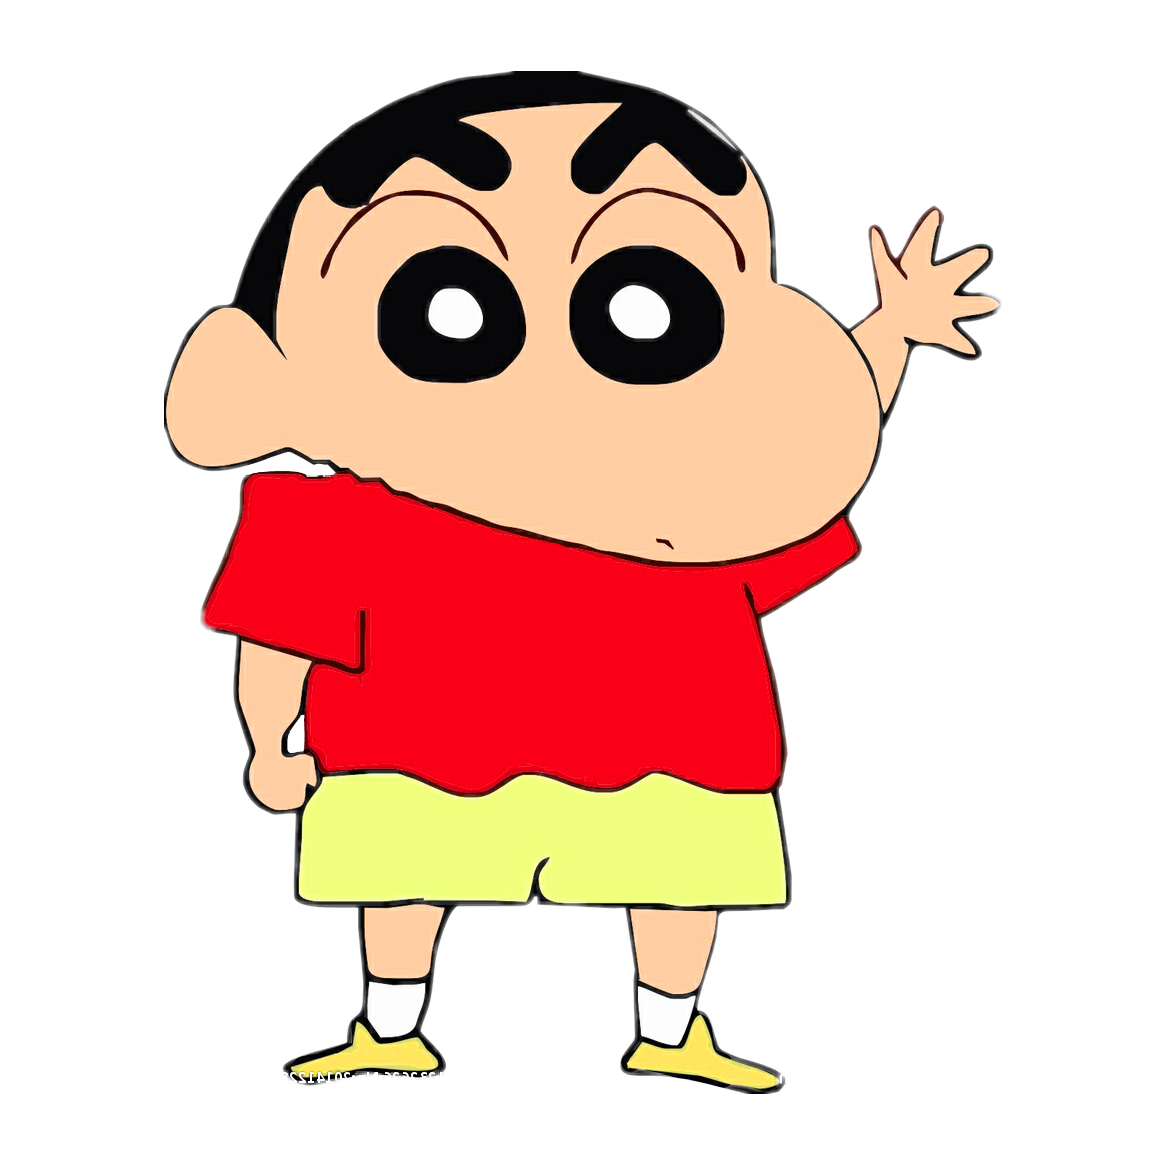 Palette knife painting of shin chan in a unique style on Craiyon